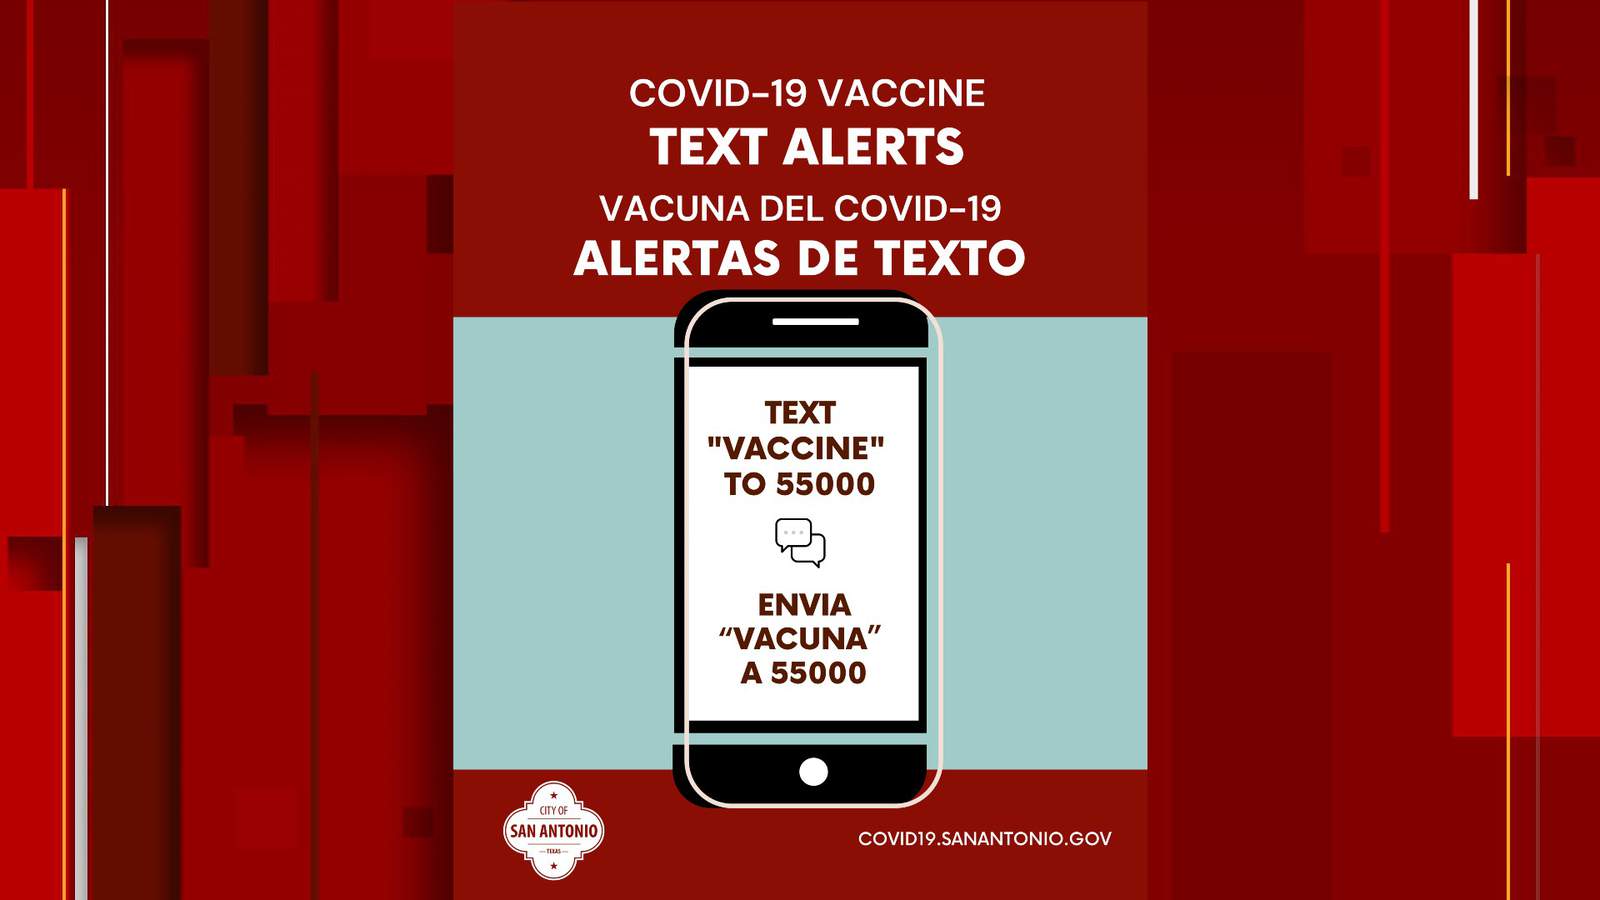 The city of San Antonio creates a text alert notification for the availability of the COVID-19 vaccine